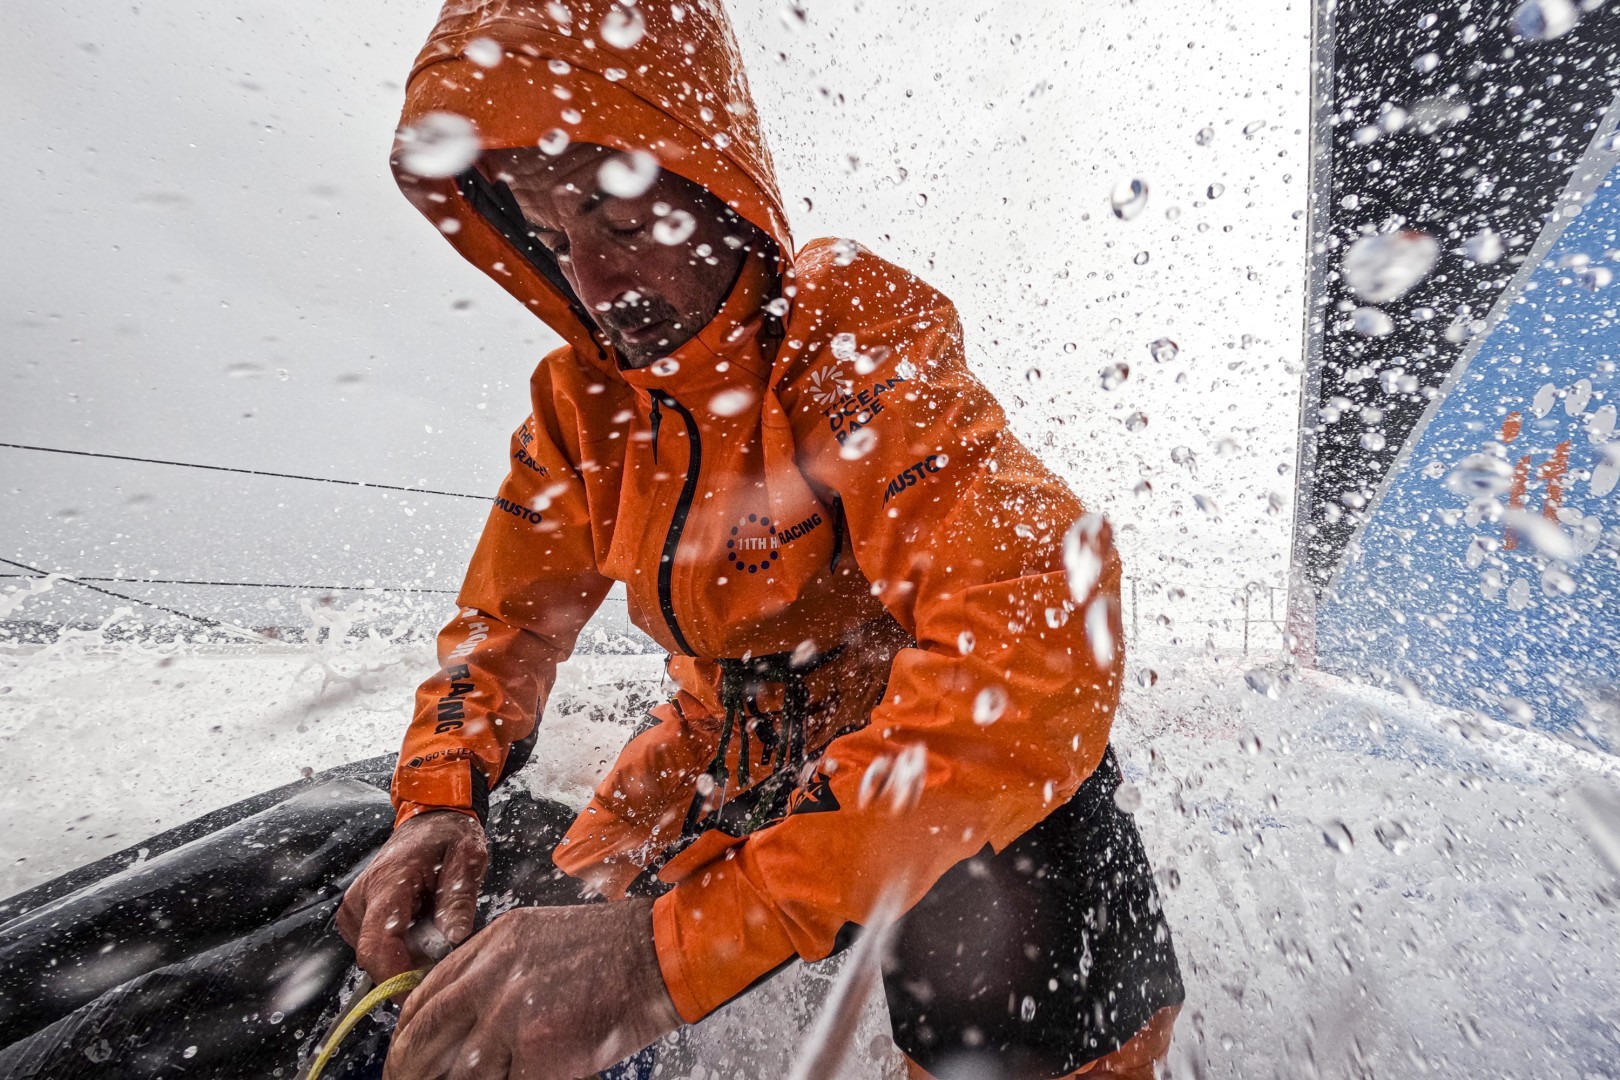 The Ocean Race 2022-23 - 25 April 2023, Leg 4 onboard 11th Hour Racing Team. Damian Foxall on the bow putting the J3 sail away.
© Amory Ross / 11th Hour Racing / The Ocean Race